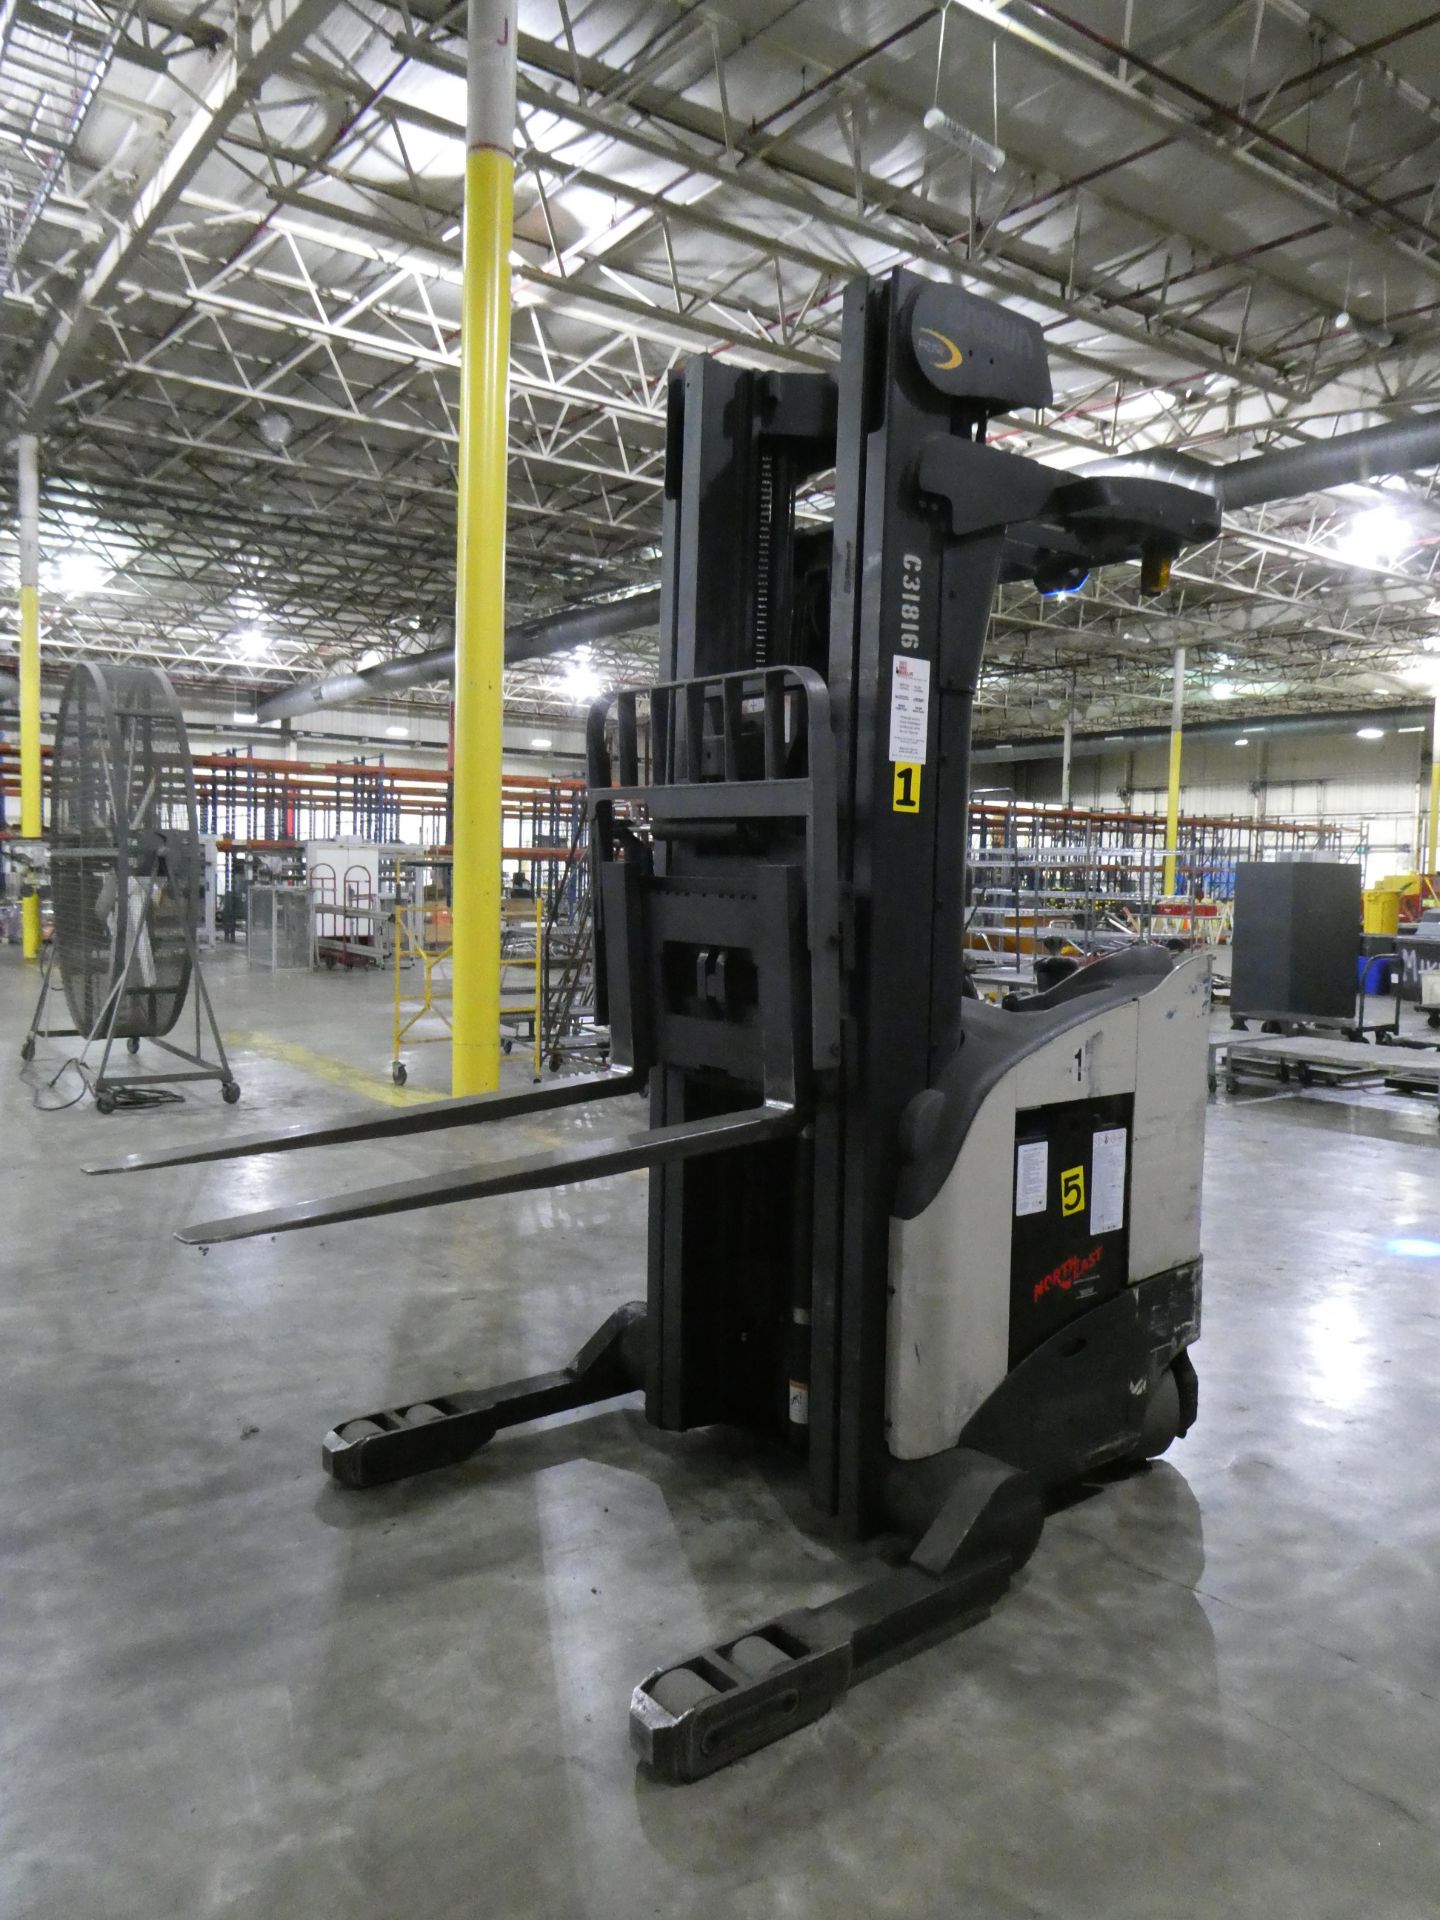 Crown Electric Reach Truck RR 5200 4500lb - Image 2 of 7